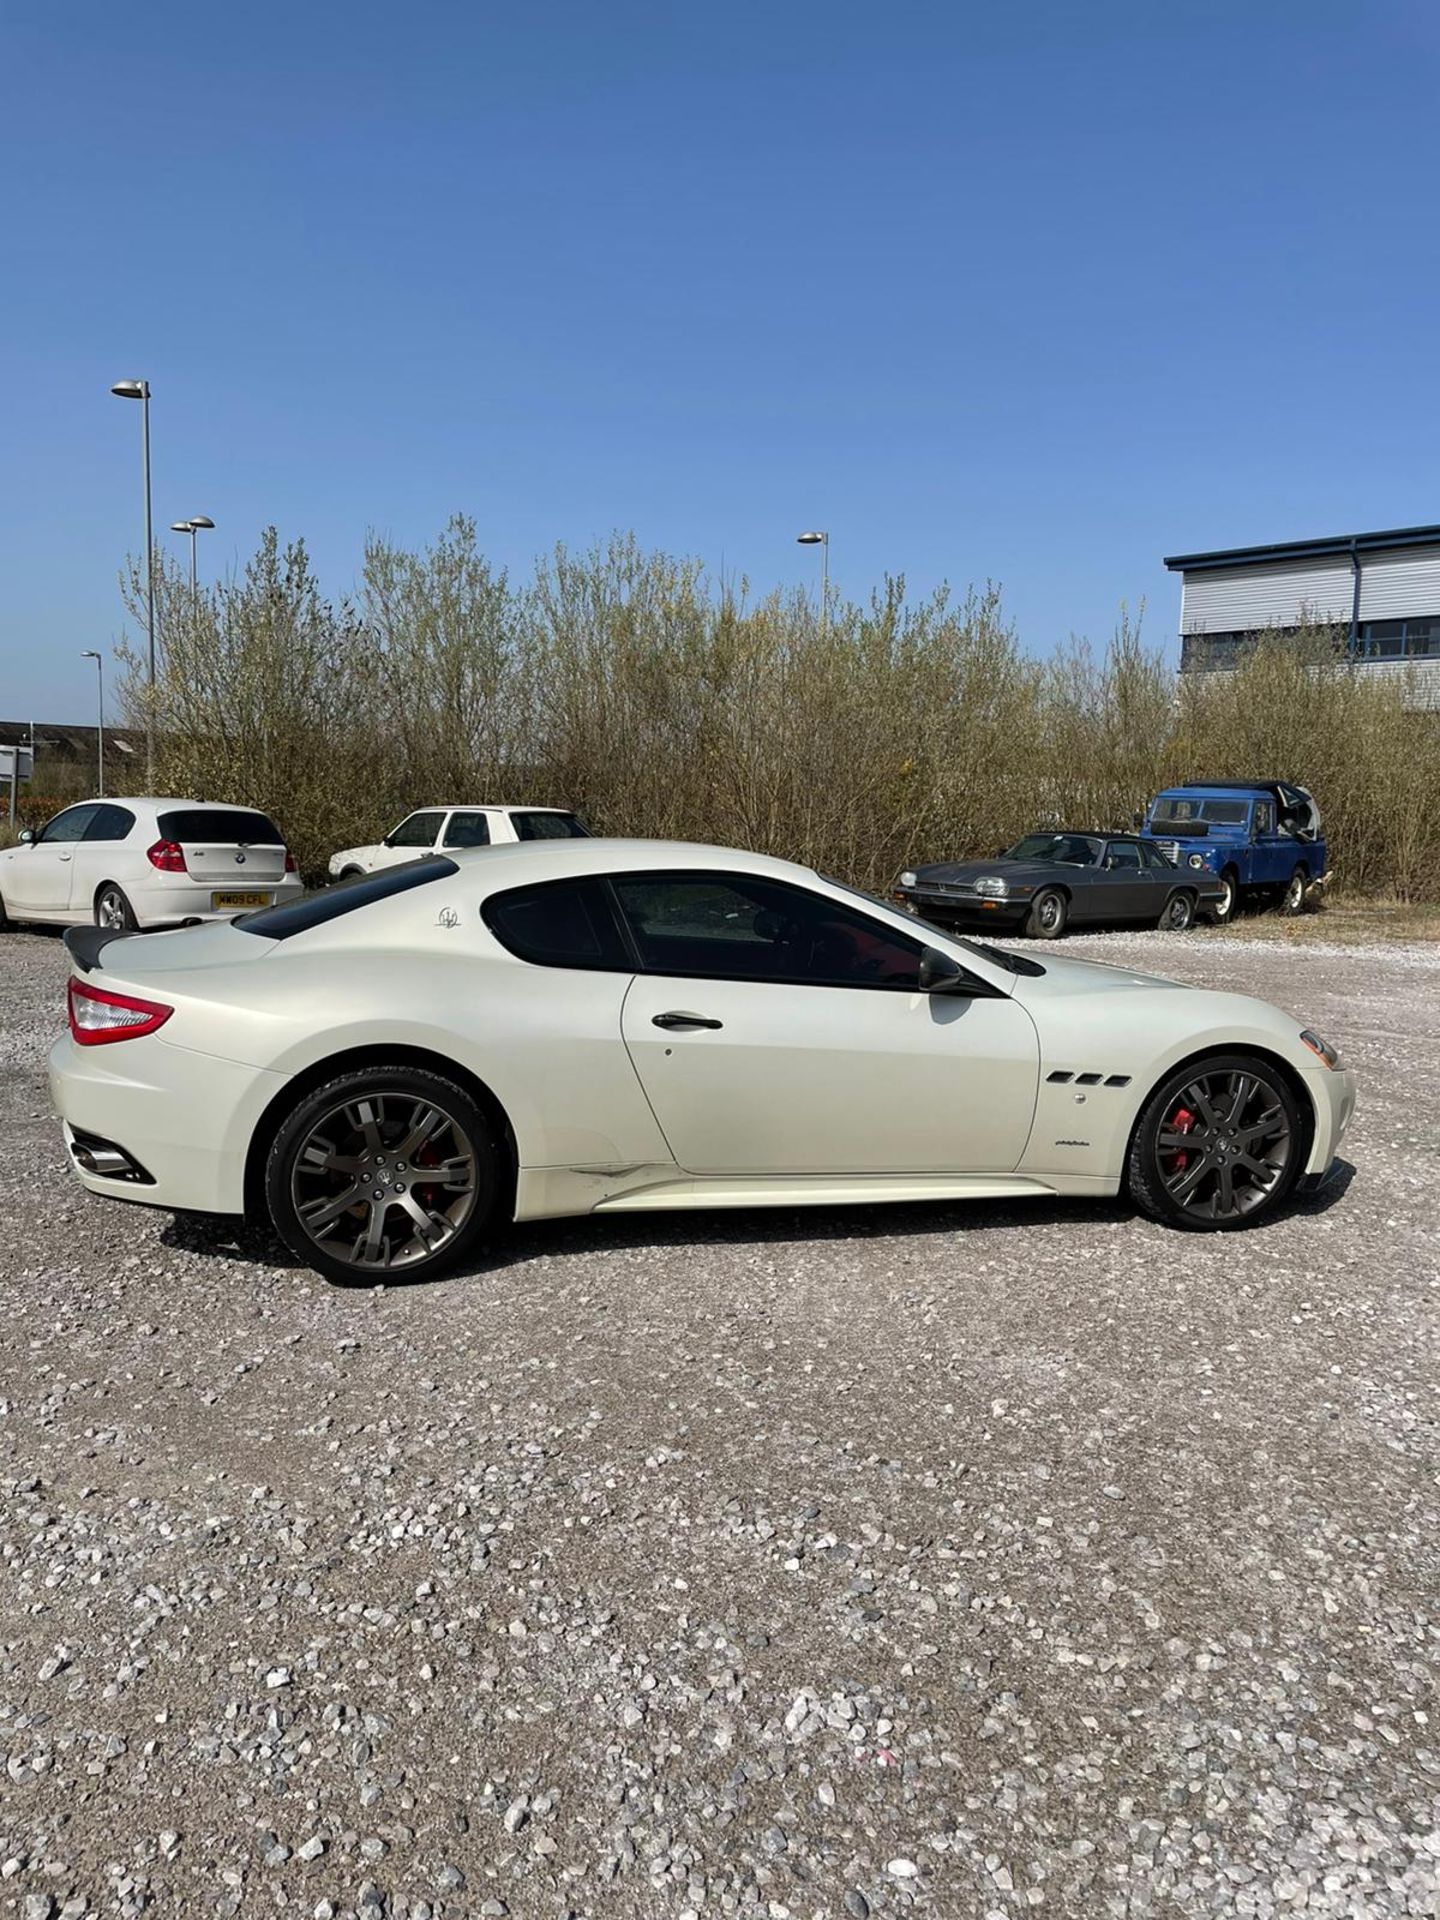 2013 MASERATI 4.7 V8 MC SHIFT, HUGE CARBON SPEC, VERY GOOD CONDITION RECENTLY CLEANED UP *PLUS VAT*